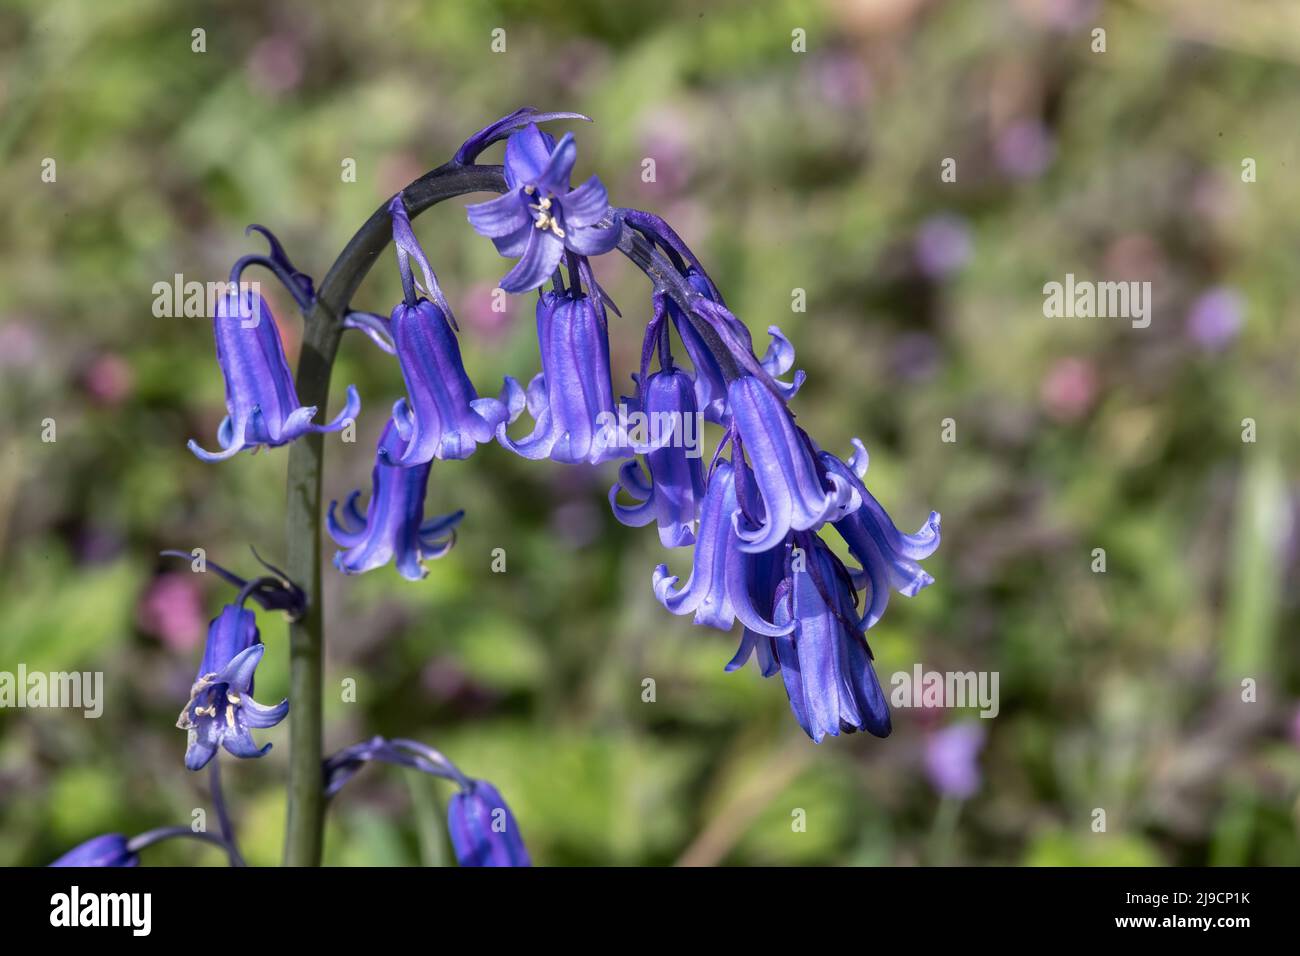 The head of a Common Bluebell flower Hyacinthoides non-scripta in early May in a residential domestic garden Stock Photo